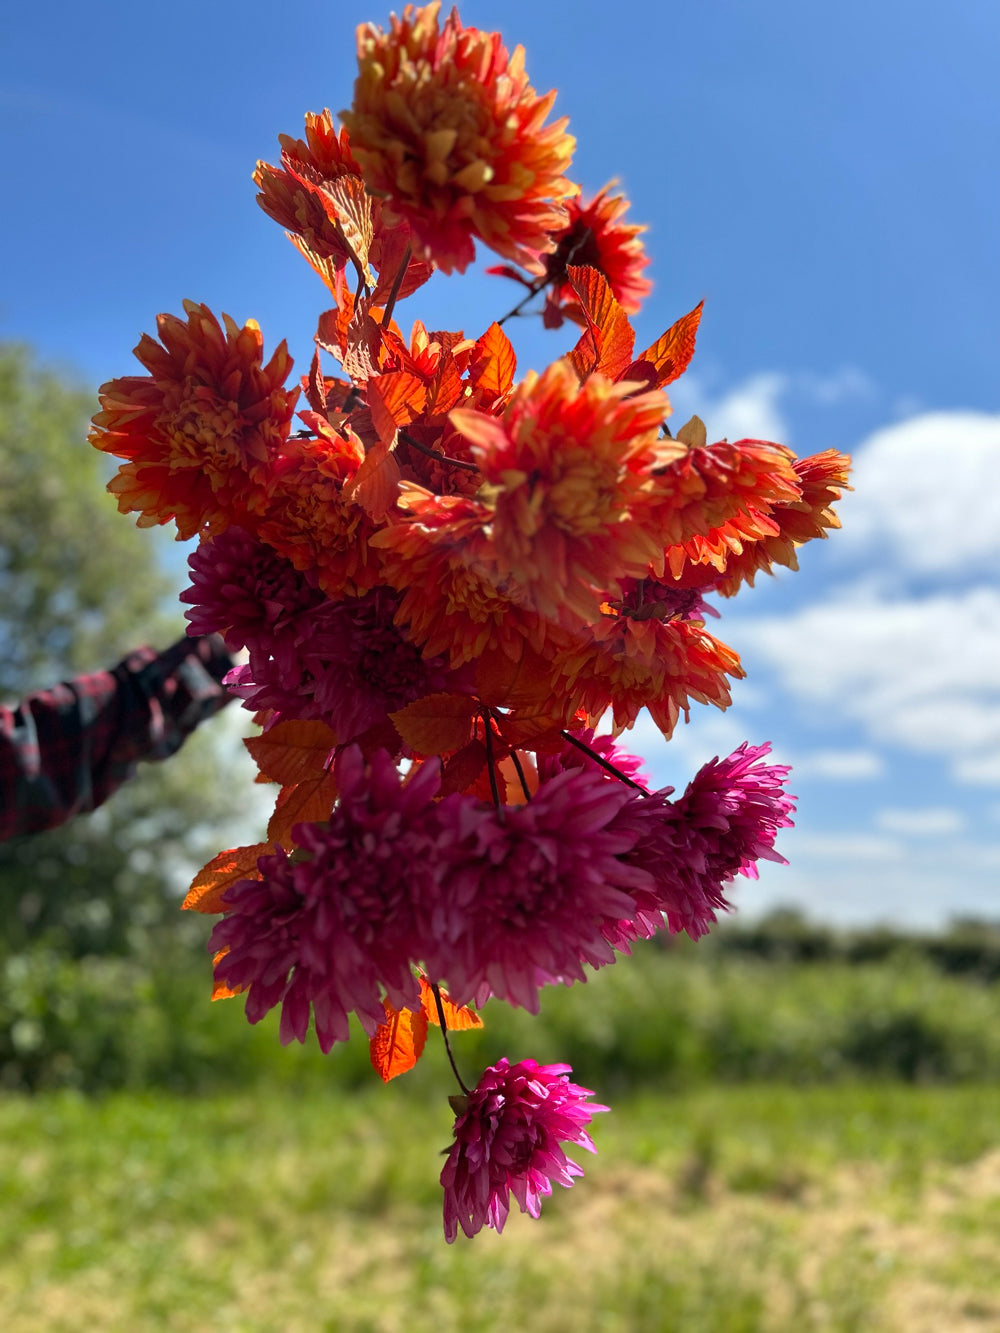 Bright pink and bright orange chrysanthemums with orange leaves and rust coloured stems, displayed against a meadow and bright blue sky